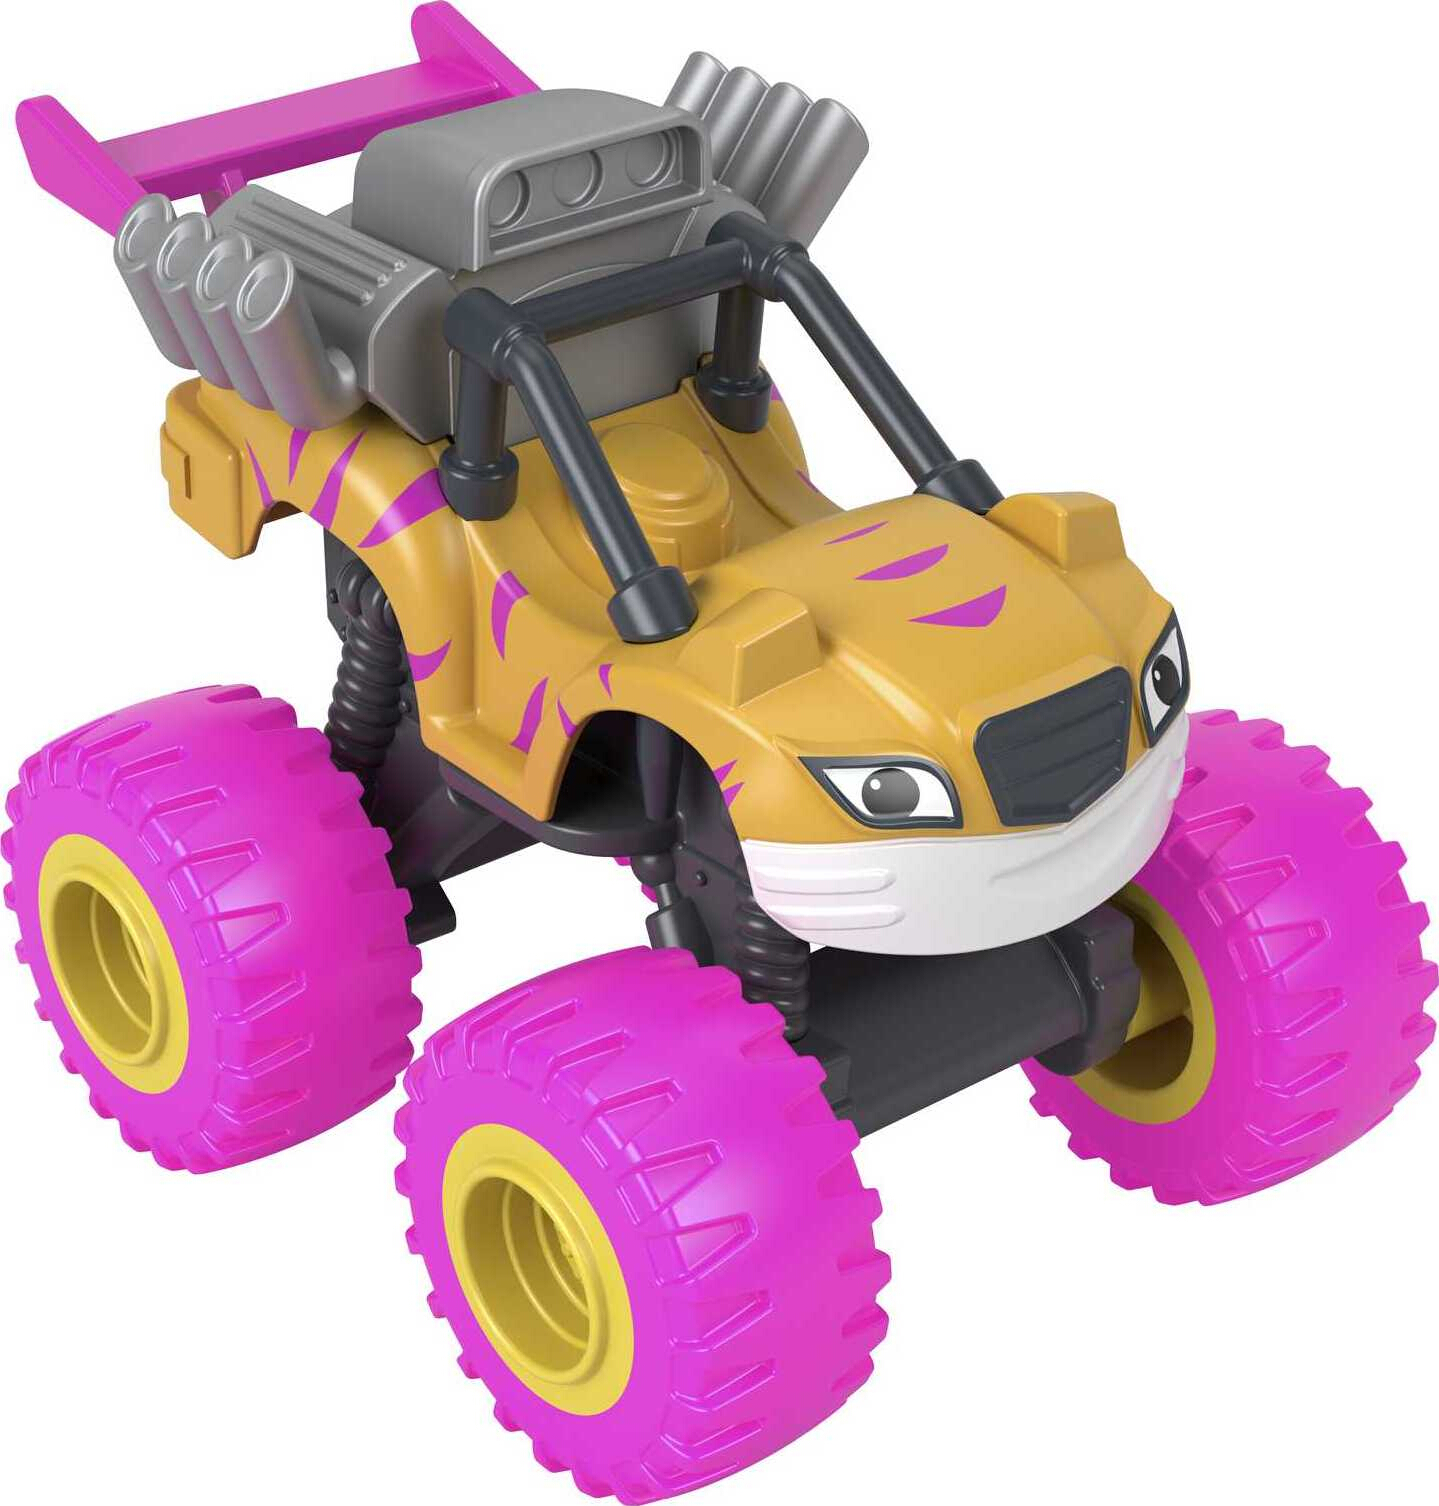 Fisher-Price Blaze and the Monster Machines Neon Wheels 5-Pack of Diecast Toy Trucks - image 5 of 6